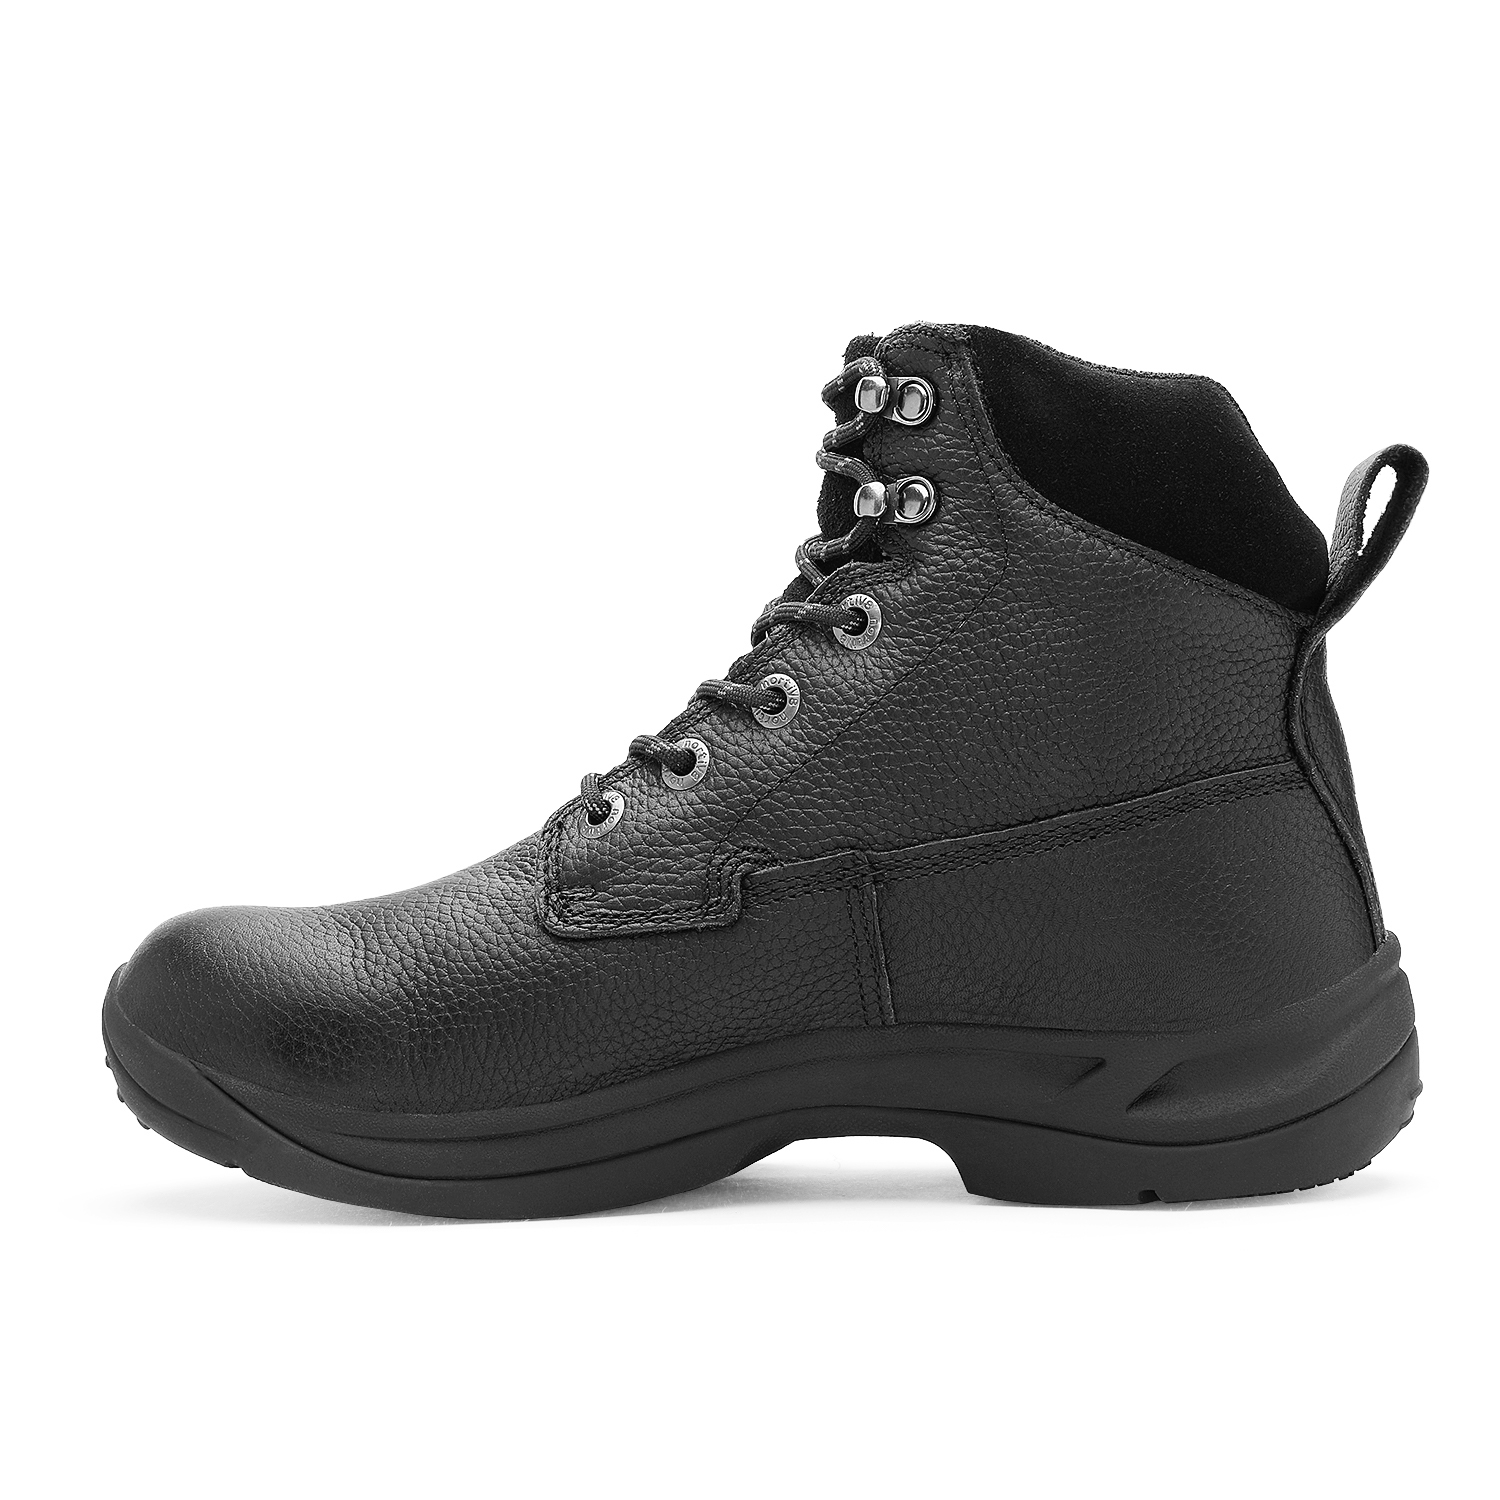 NORTIV 8 Men Military Tactical Boots Shoes Safety Work Boots Combat Army Lightweight Ankle Boots For Men WORKSTEP BLACK/LITCHI Size 8 - image 2 of 6